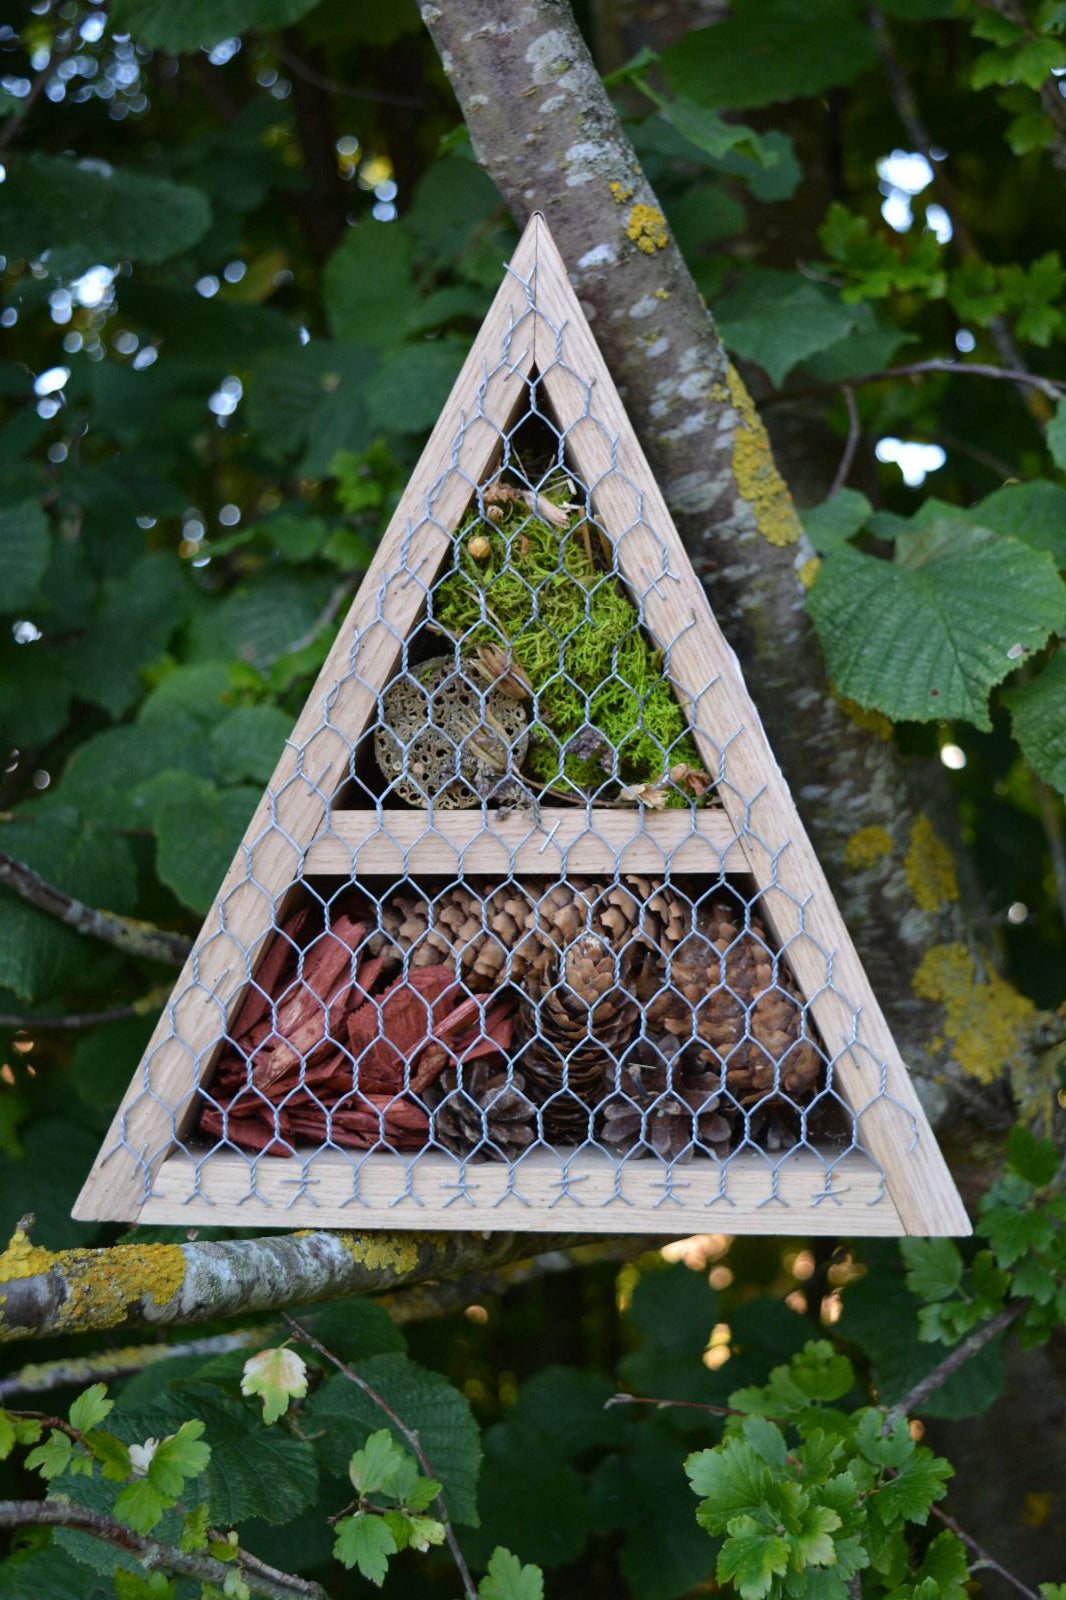 Pyramid Insect Hotel